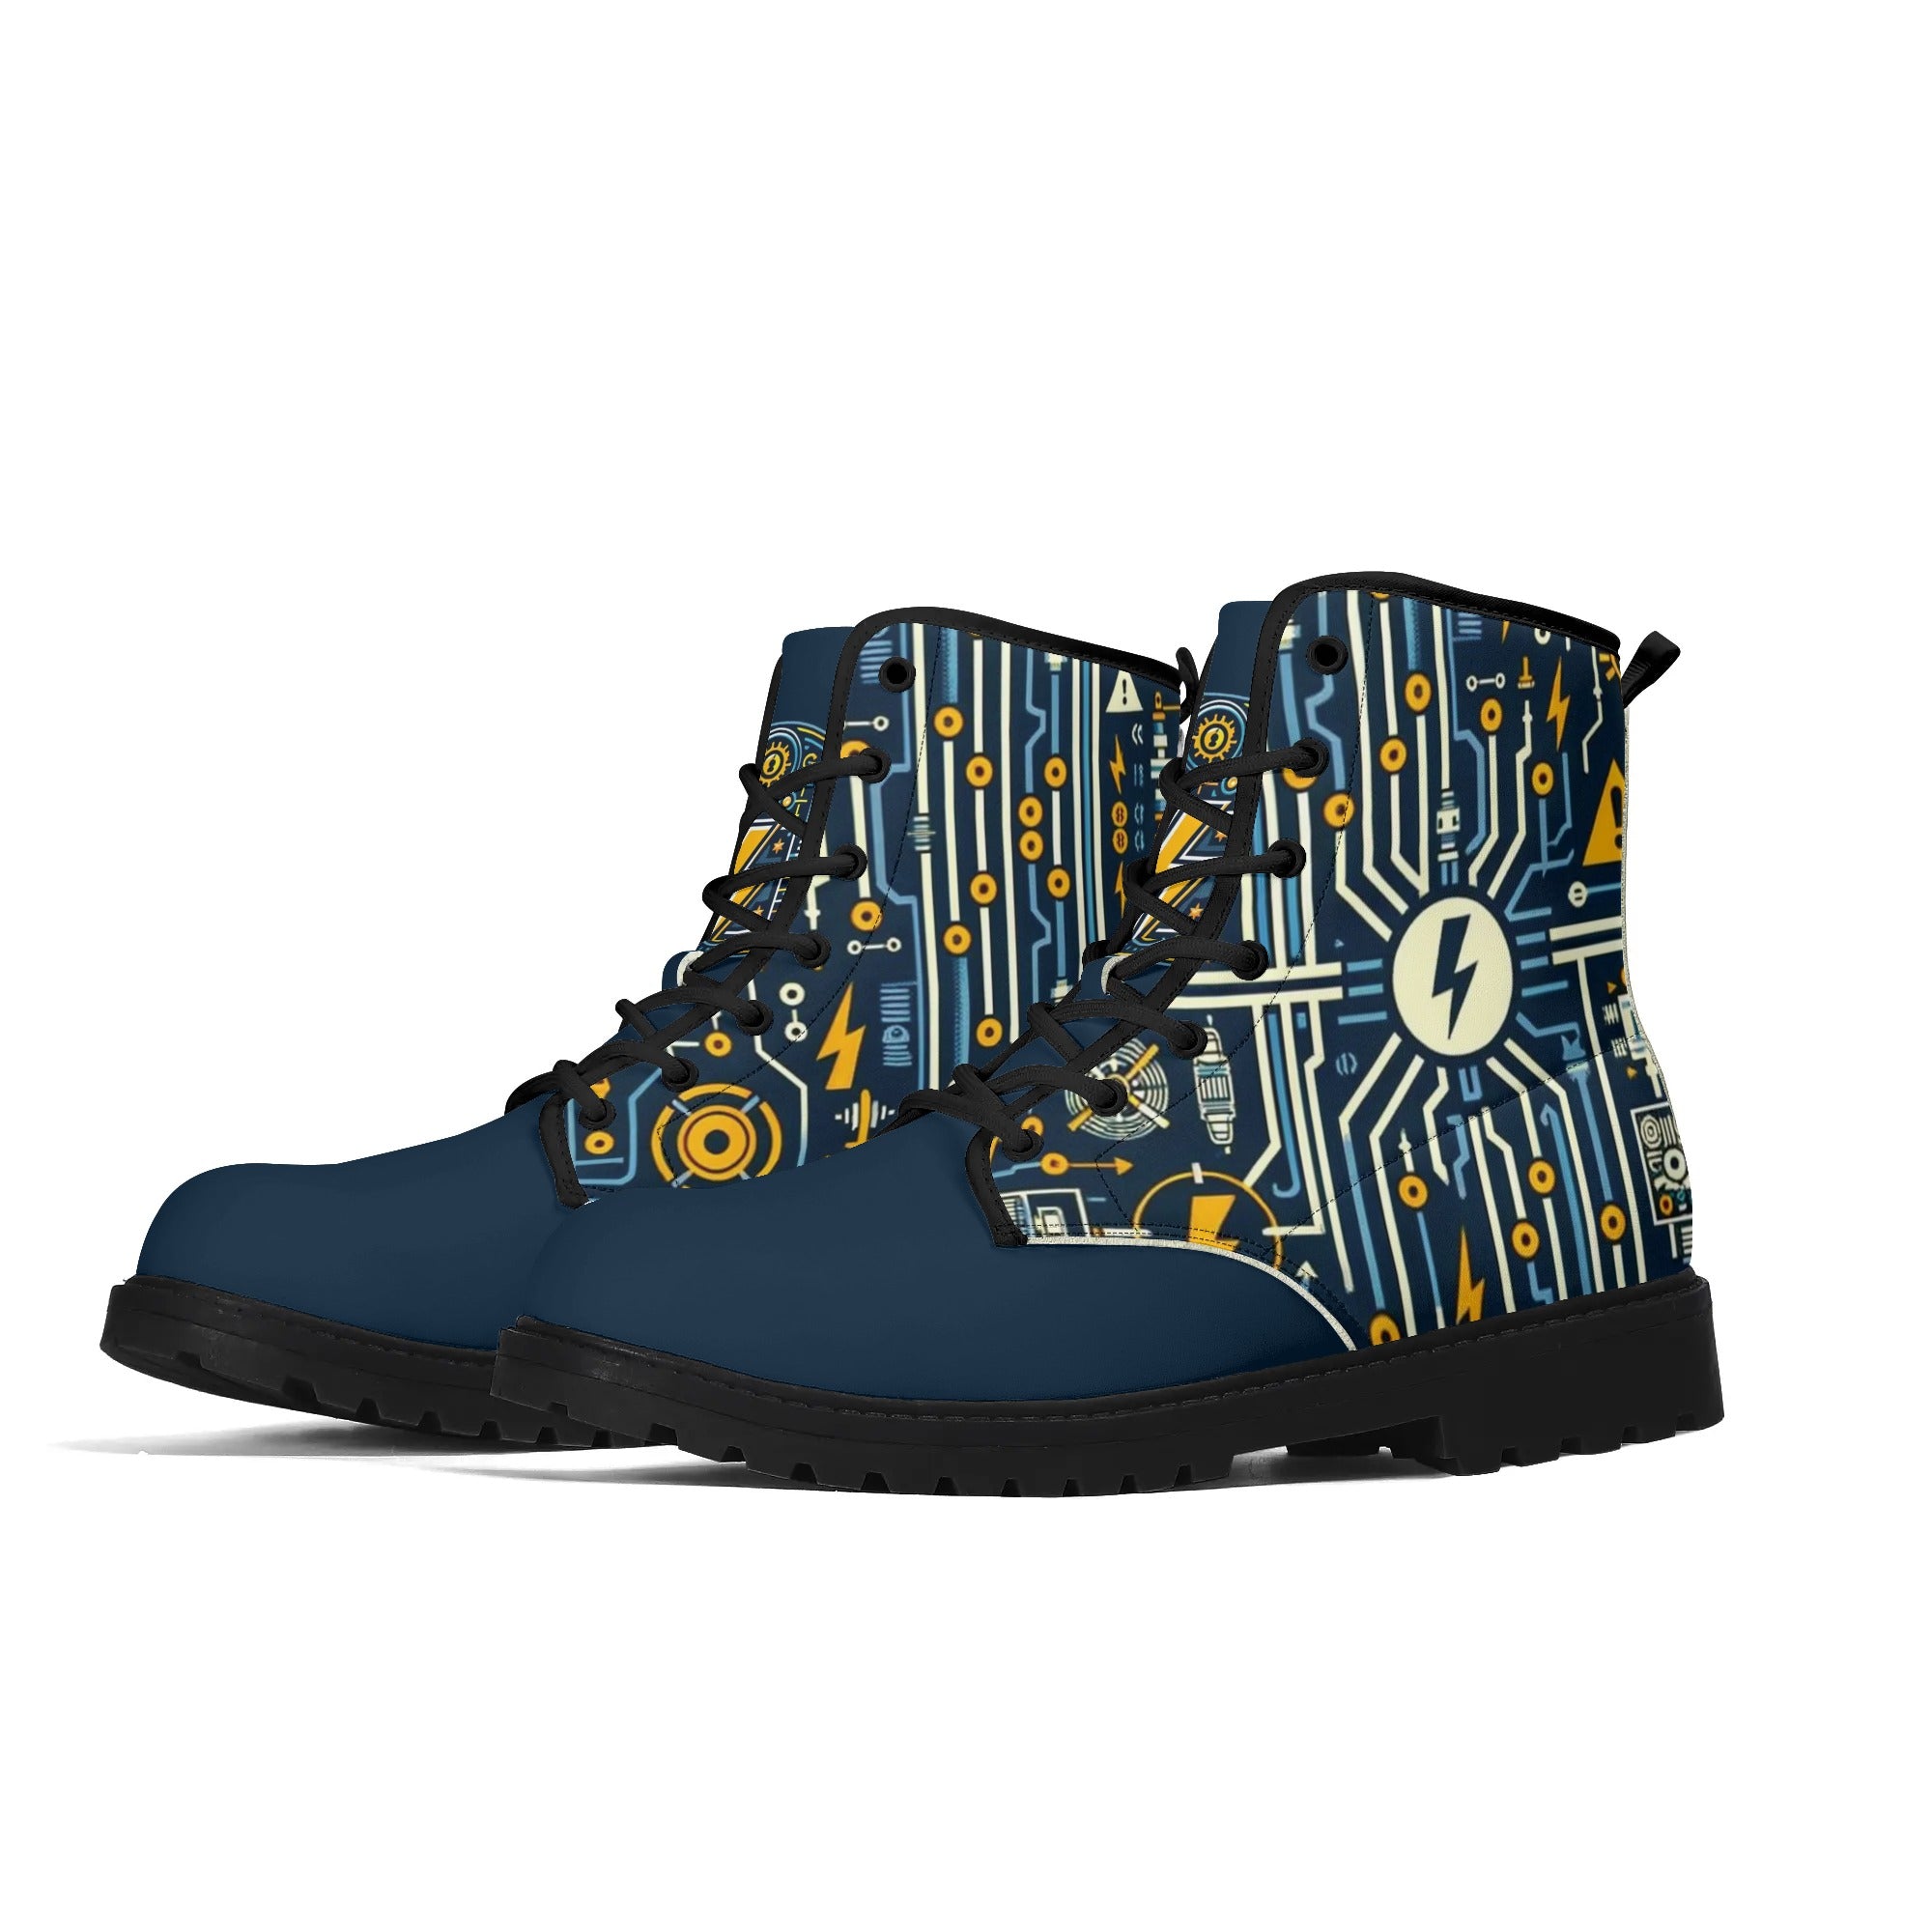 Custom Eco-Friendly Printed Shoes for All Seasons - Waterproof, and DurableMens Upgraded Black Outsole Leather Boots for Electricians